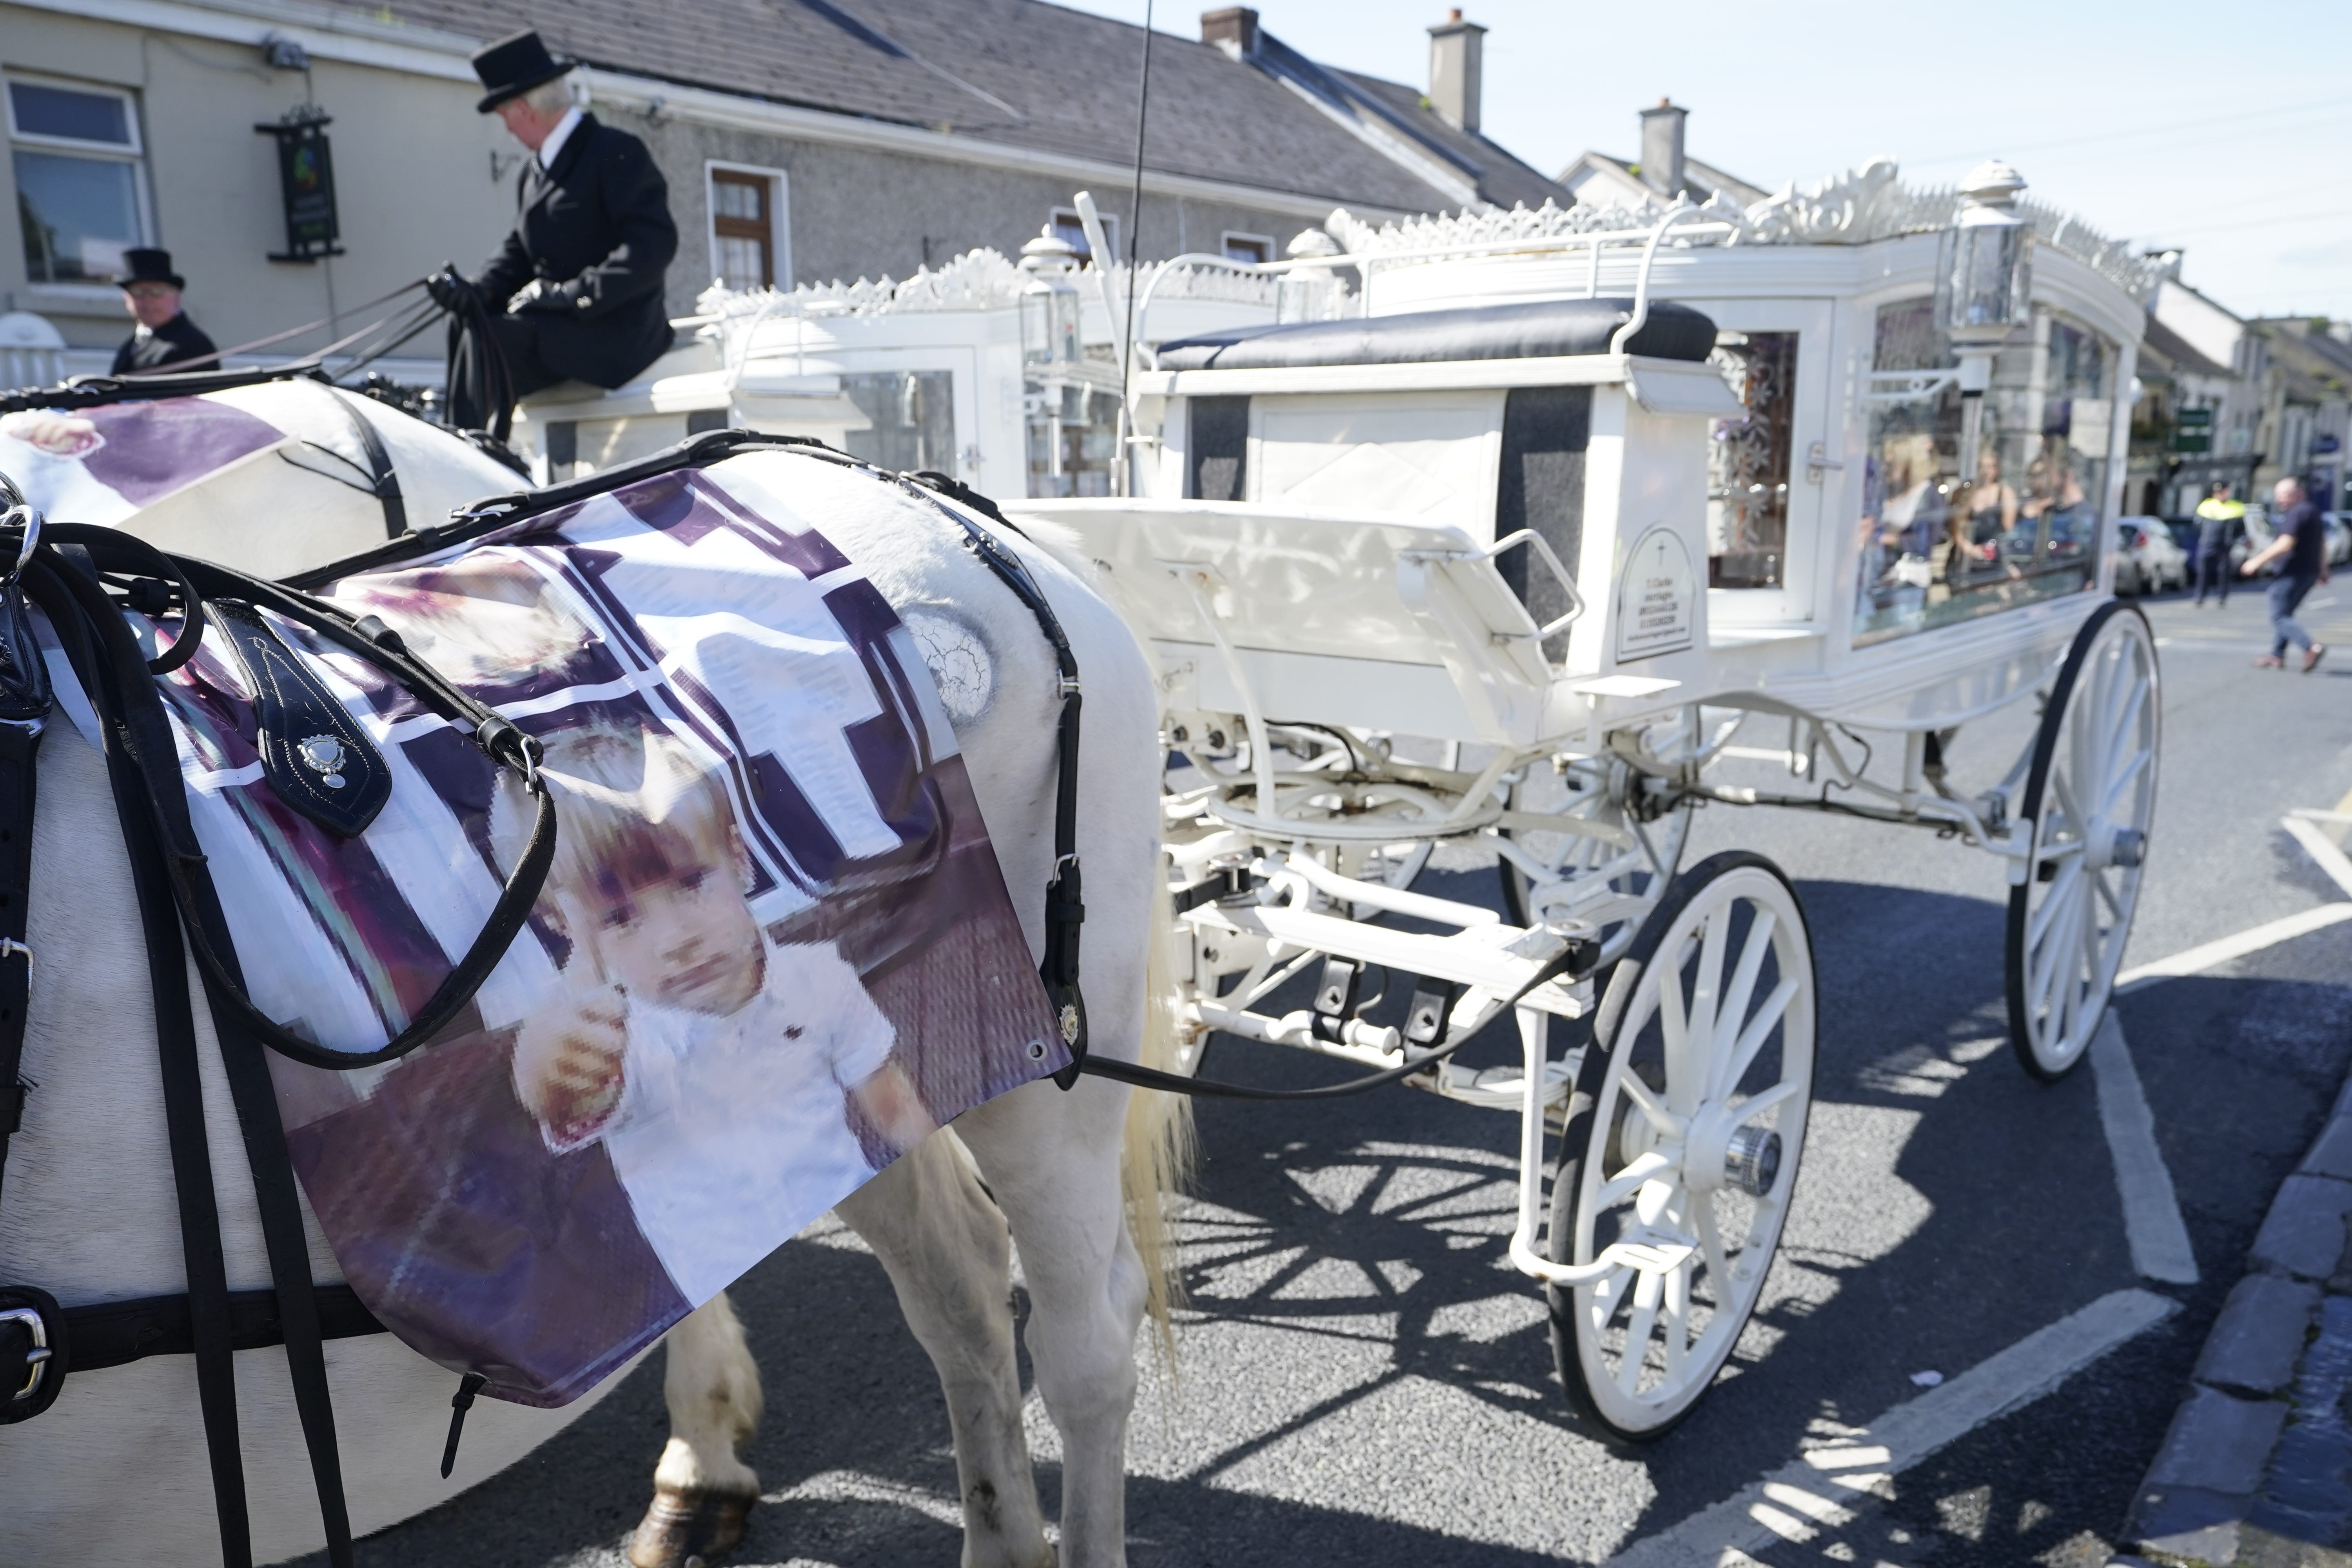 Horse-drawn carriages carrying the coffins of Thomas Reilly, 45, his wife Bridget Reilly, 46, and their three-year-old grandson Tom Reilly, arrive at St John the Baptist Church in Cashel, Co Tipperary, for their funeral service (Niall Carson/PA)